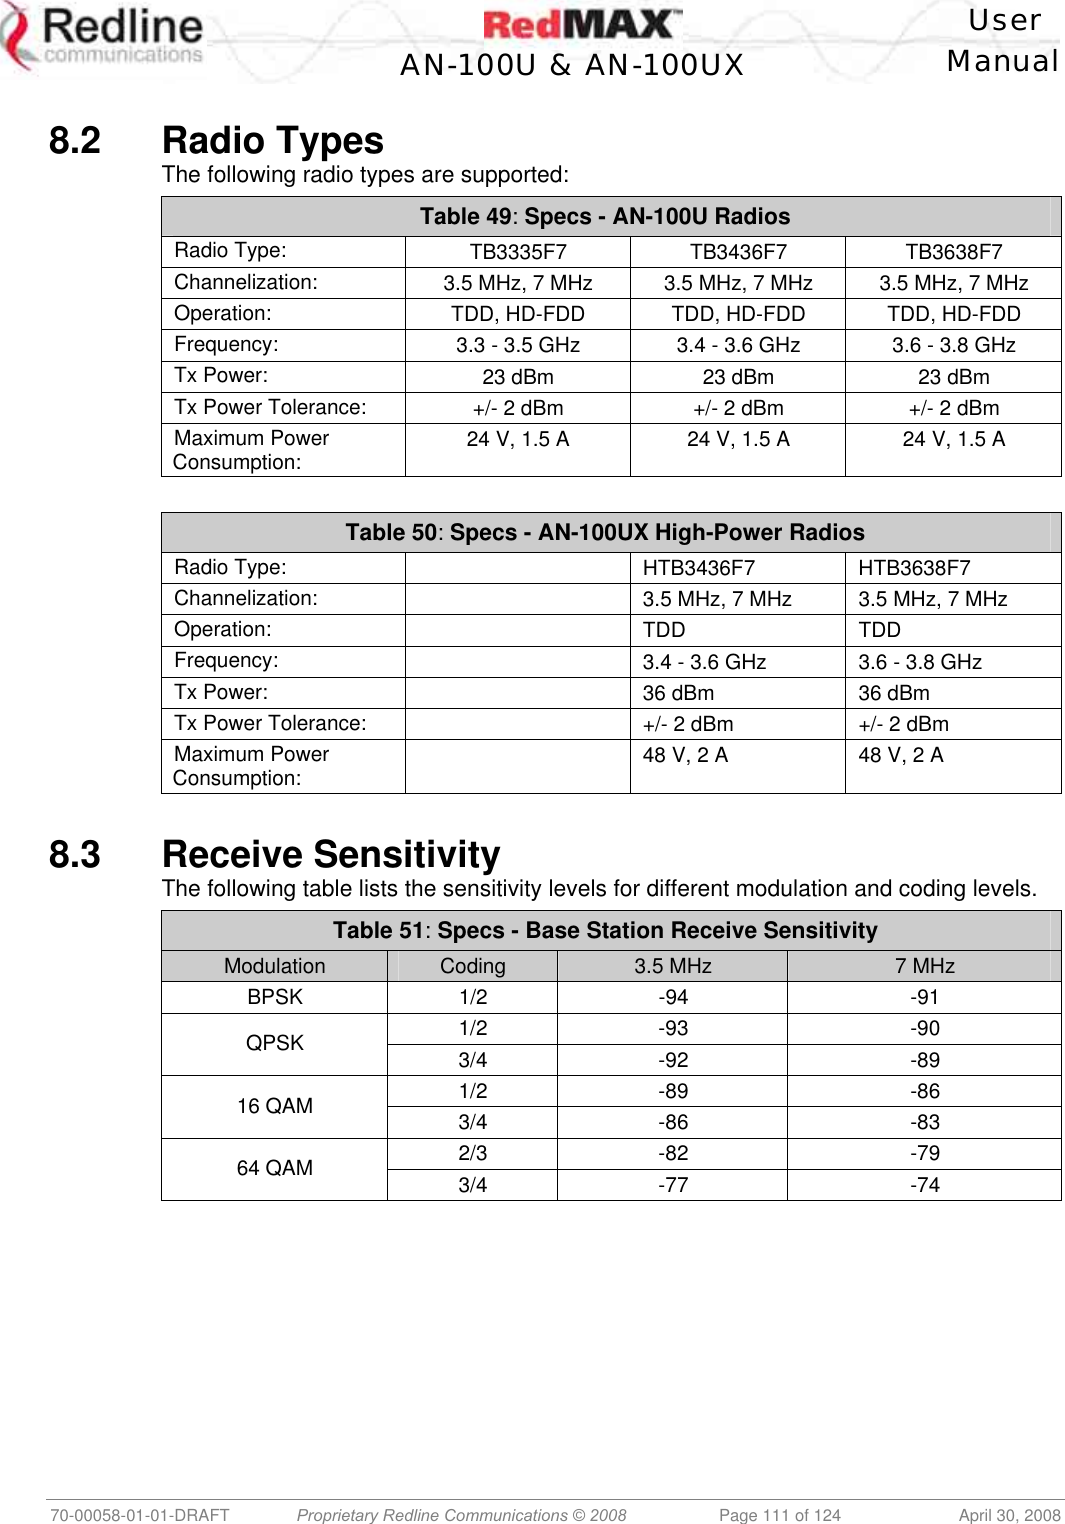    User  AN-100U &amp; AN-100UX Manual   70-00058-01-01-DRAFT  Proprietary Redline Communications © 2008   Page 111 of 124  April 30, 2008  8.2 Radio Types The following radio types are supported: Table 49: Specs - AN-100U Radios Radio Type:  TB3335F7 TB3436F7 TB3638F7 Channelization:  3.5 MHz, 7 MHz  3.5 MHz, 7 MHz  3.5 MHz, 7 MHz Operation:  TDD, HD-FDD  TDD, HD-FDD  TDD, HD-FDD Frequency:  3.3 - 3.5 GHz  3.4 - 3.6 GHz  3.6 - 3.8 GHz Tx Power:  23 dBm  23 dBm  23 dBm Tx Power Tolerance:  +/- 2 dBm  +/- 2 dBm  +/- 2 dBm Maximum Power Consumption:  24 V, 1.5 A  24 V, 1.5 A  24 V, 1.5 A  Table 50: Specs - AN-100UX High-Power Radios Radio Type:   HTB3436F7 HTB3638F7 Channelization:    3.5 MHz, 7 MHz  3.5 MHz, 7 MHz Operation:   TDD TDD Frequency:    3.4 - 3.6 GHz  3.6 - 3.8 GHz Tx Power:    36 dBm  36 dBm Tx Power Tolerance:    +/- 2 dBm  +/- 2 dBm Maximum Power Consumption:    48 V, 2 A  48 V, 2 A  8.3 Receive Sensitivity The following table lists the sensitivity levels for different modulation and coding levels. Table 51: Specs - Base Station Receive Sensitivity Modulation  Coding  3.5 MHz  7 MHz BPSK 1/2  -94  -91 1/2 -93  -90 QPSK  3/4 -92  -89 1/2 -89  -86 16 QAM  3/4 -86  -83 2/3 -82  -79 64 QAM  3/4 -77  -74  